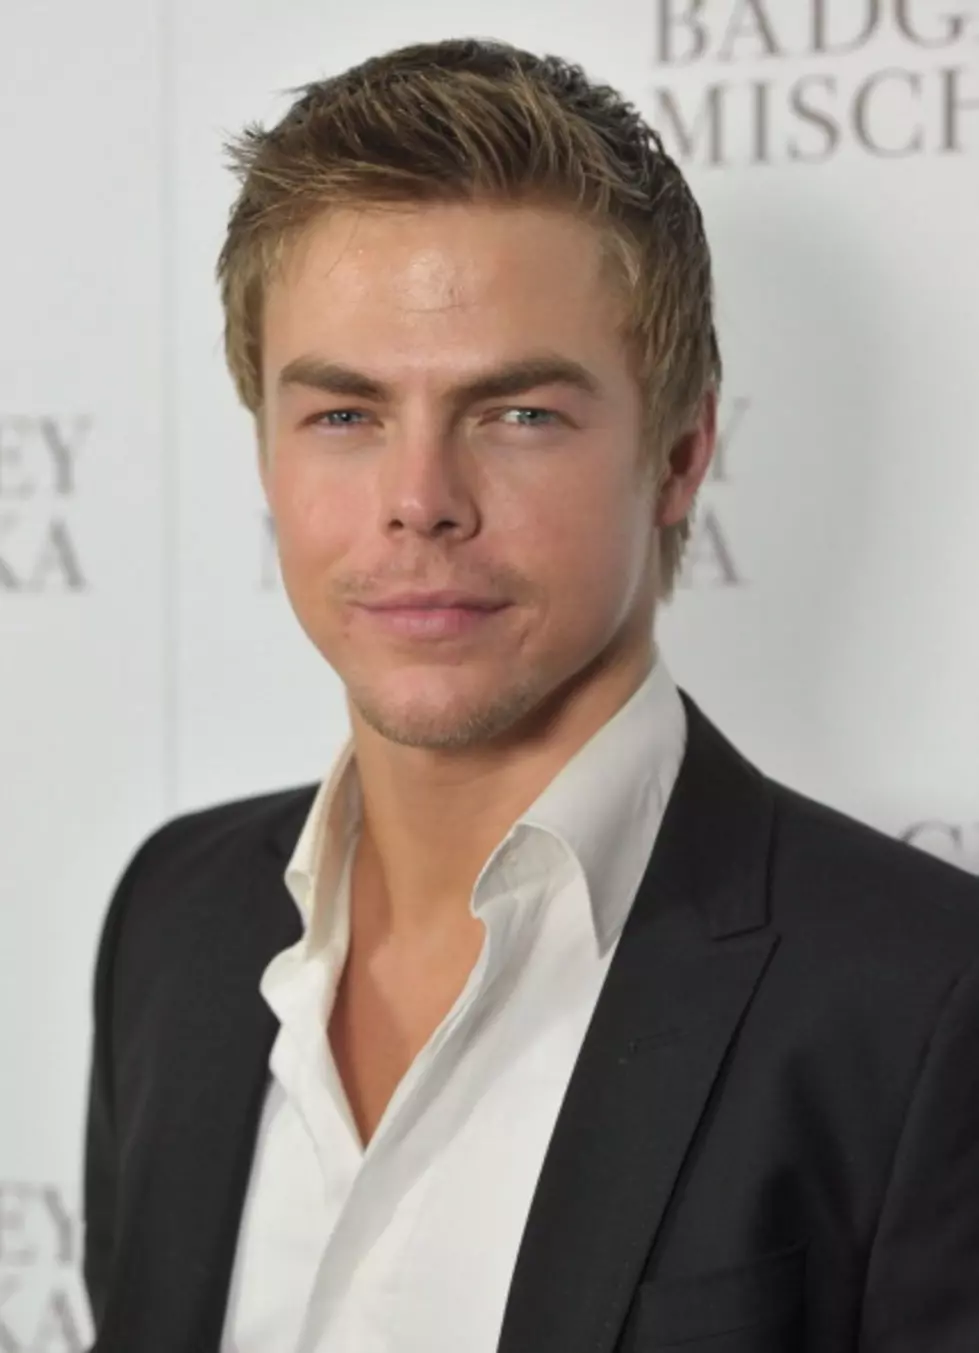 Today&#8217;s Celebrity Birthdays Include Derek Hough of &#8216;Dancing With the Stars&#8217;